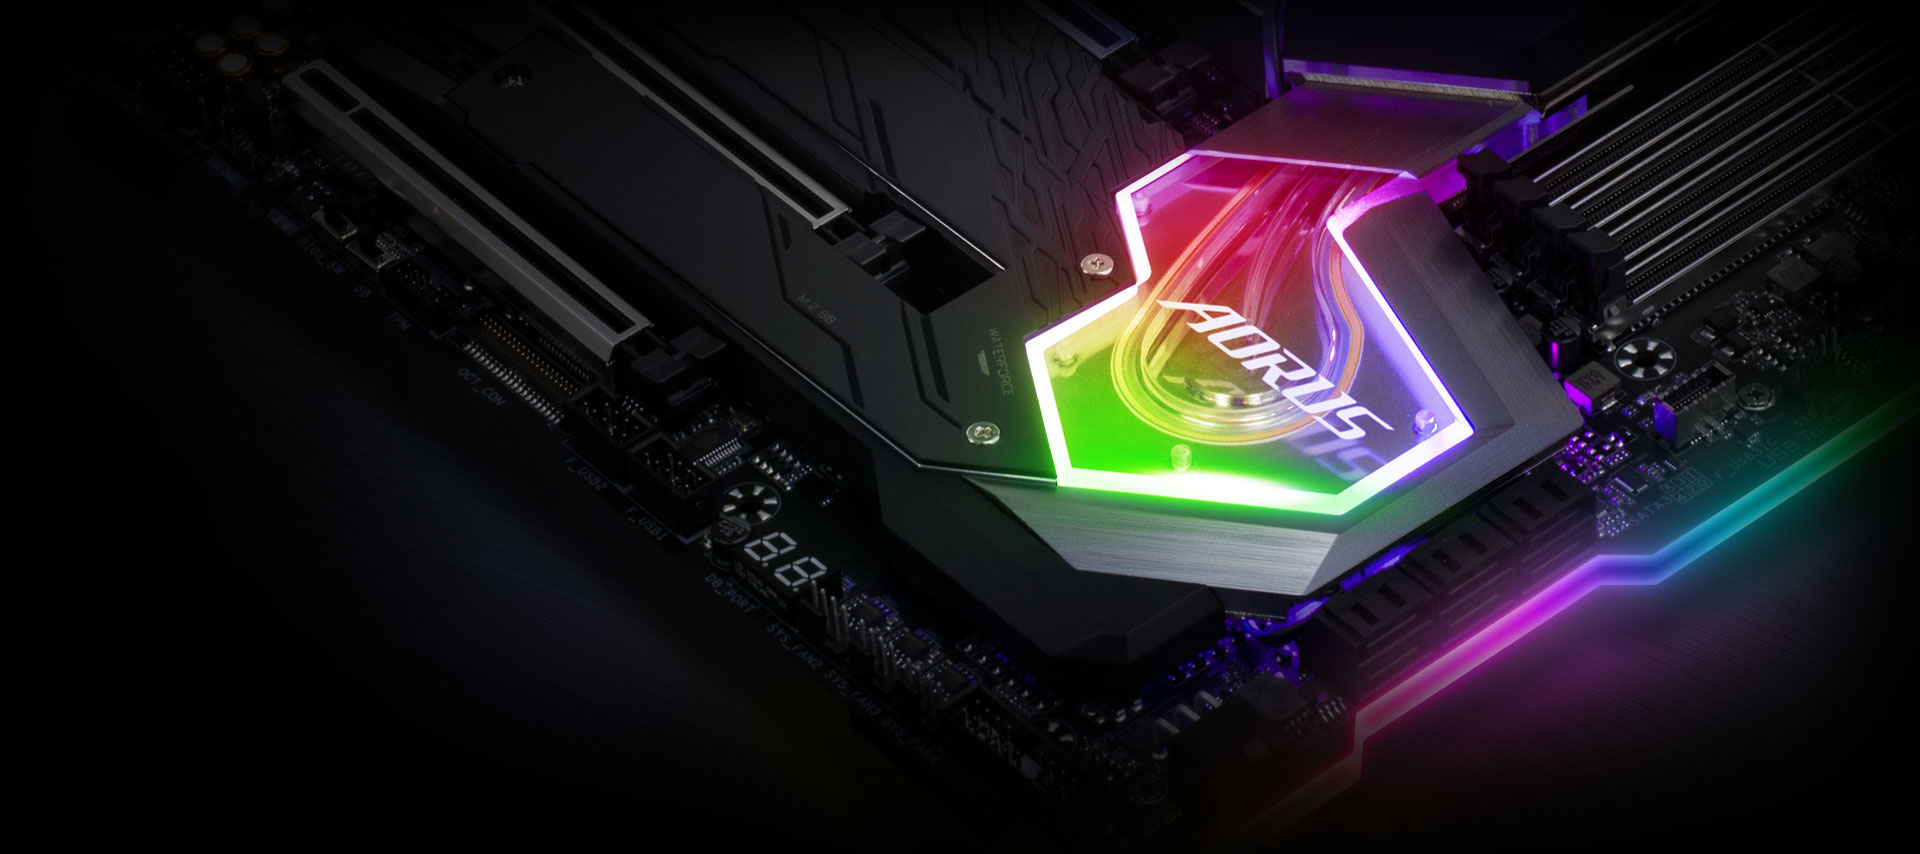 Closeup of the RGB-lit AORUS logo on the motherboard